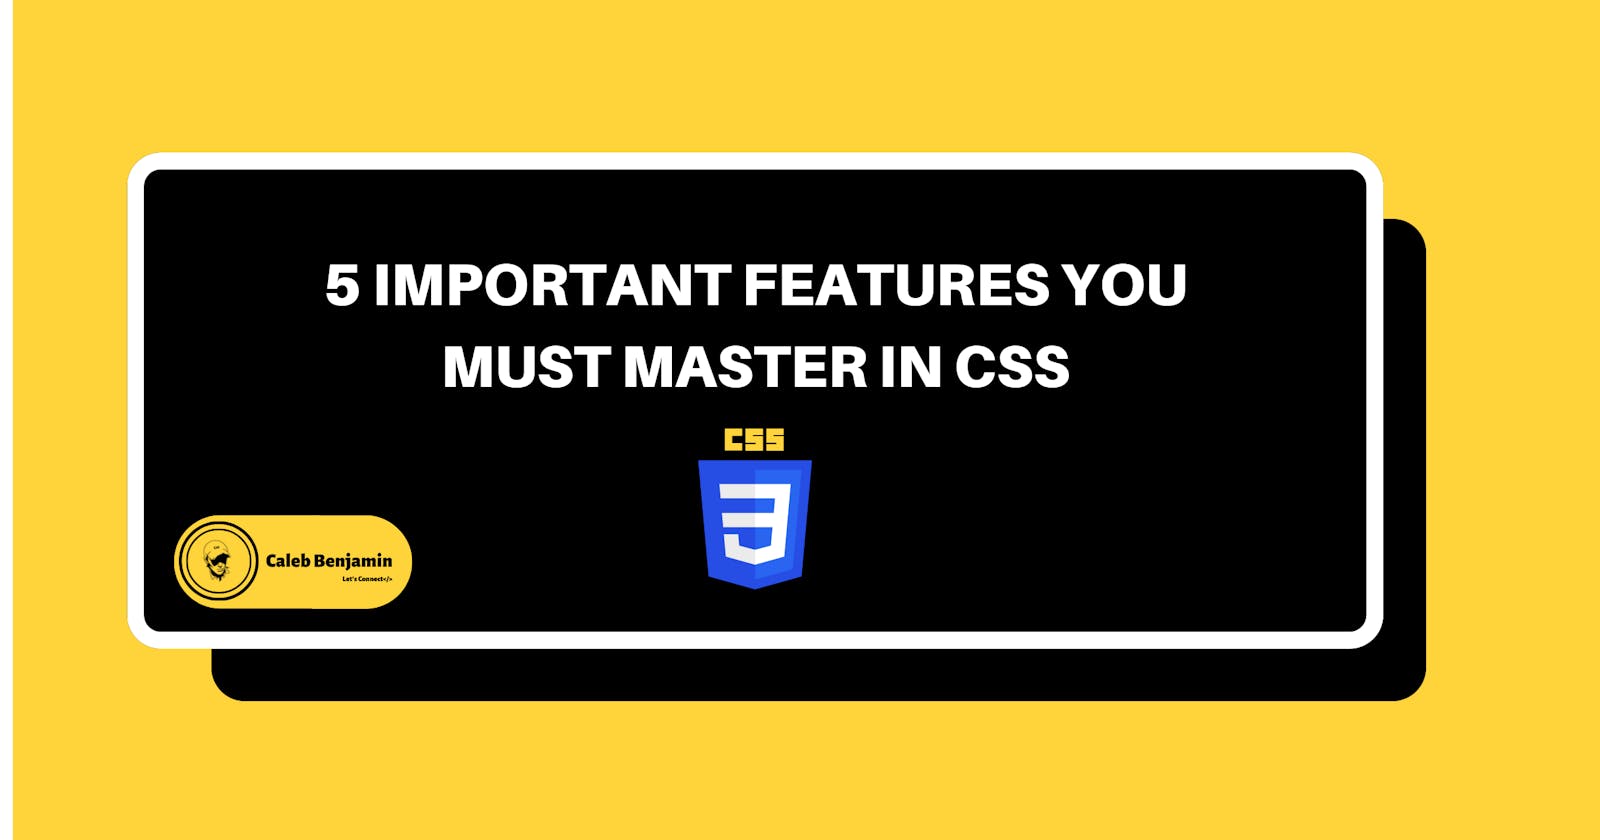 5 important features you must master in CSS